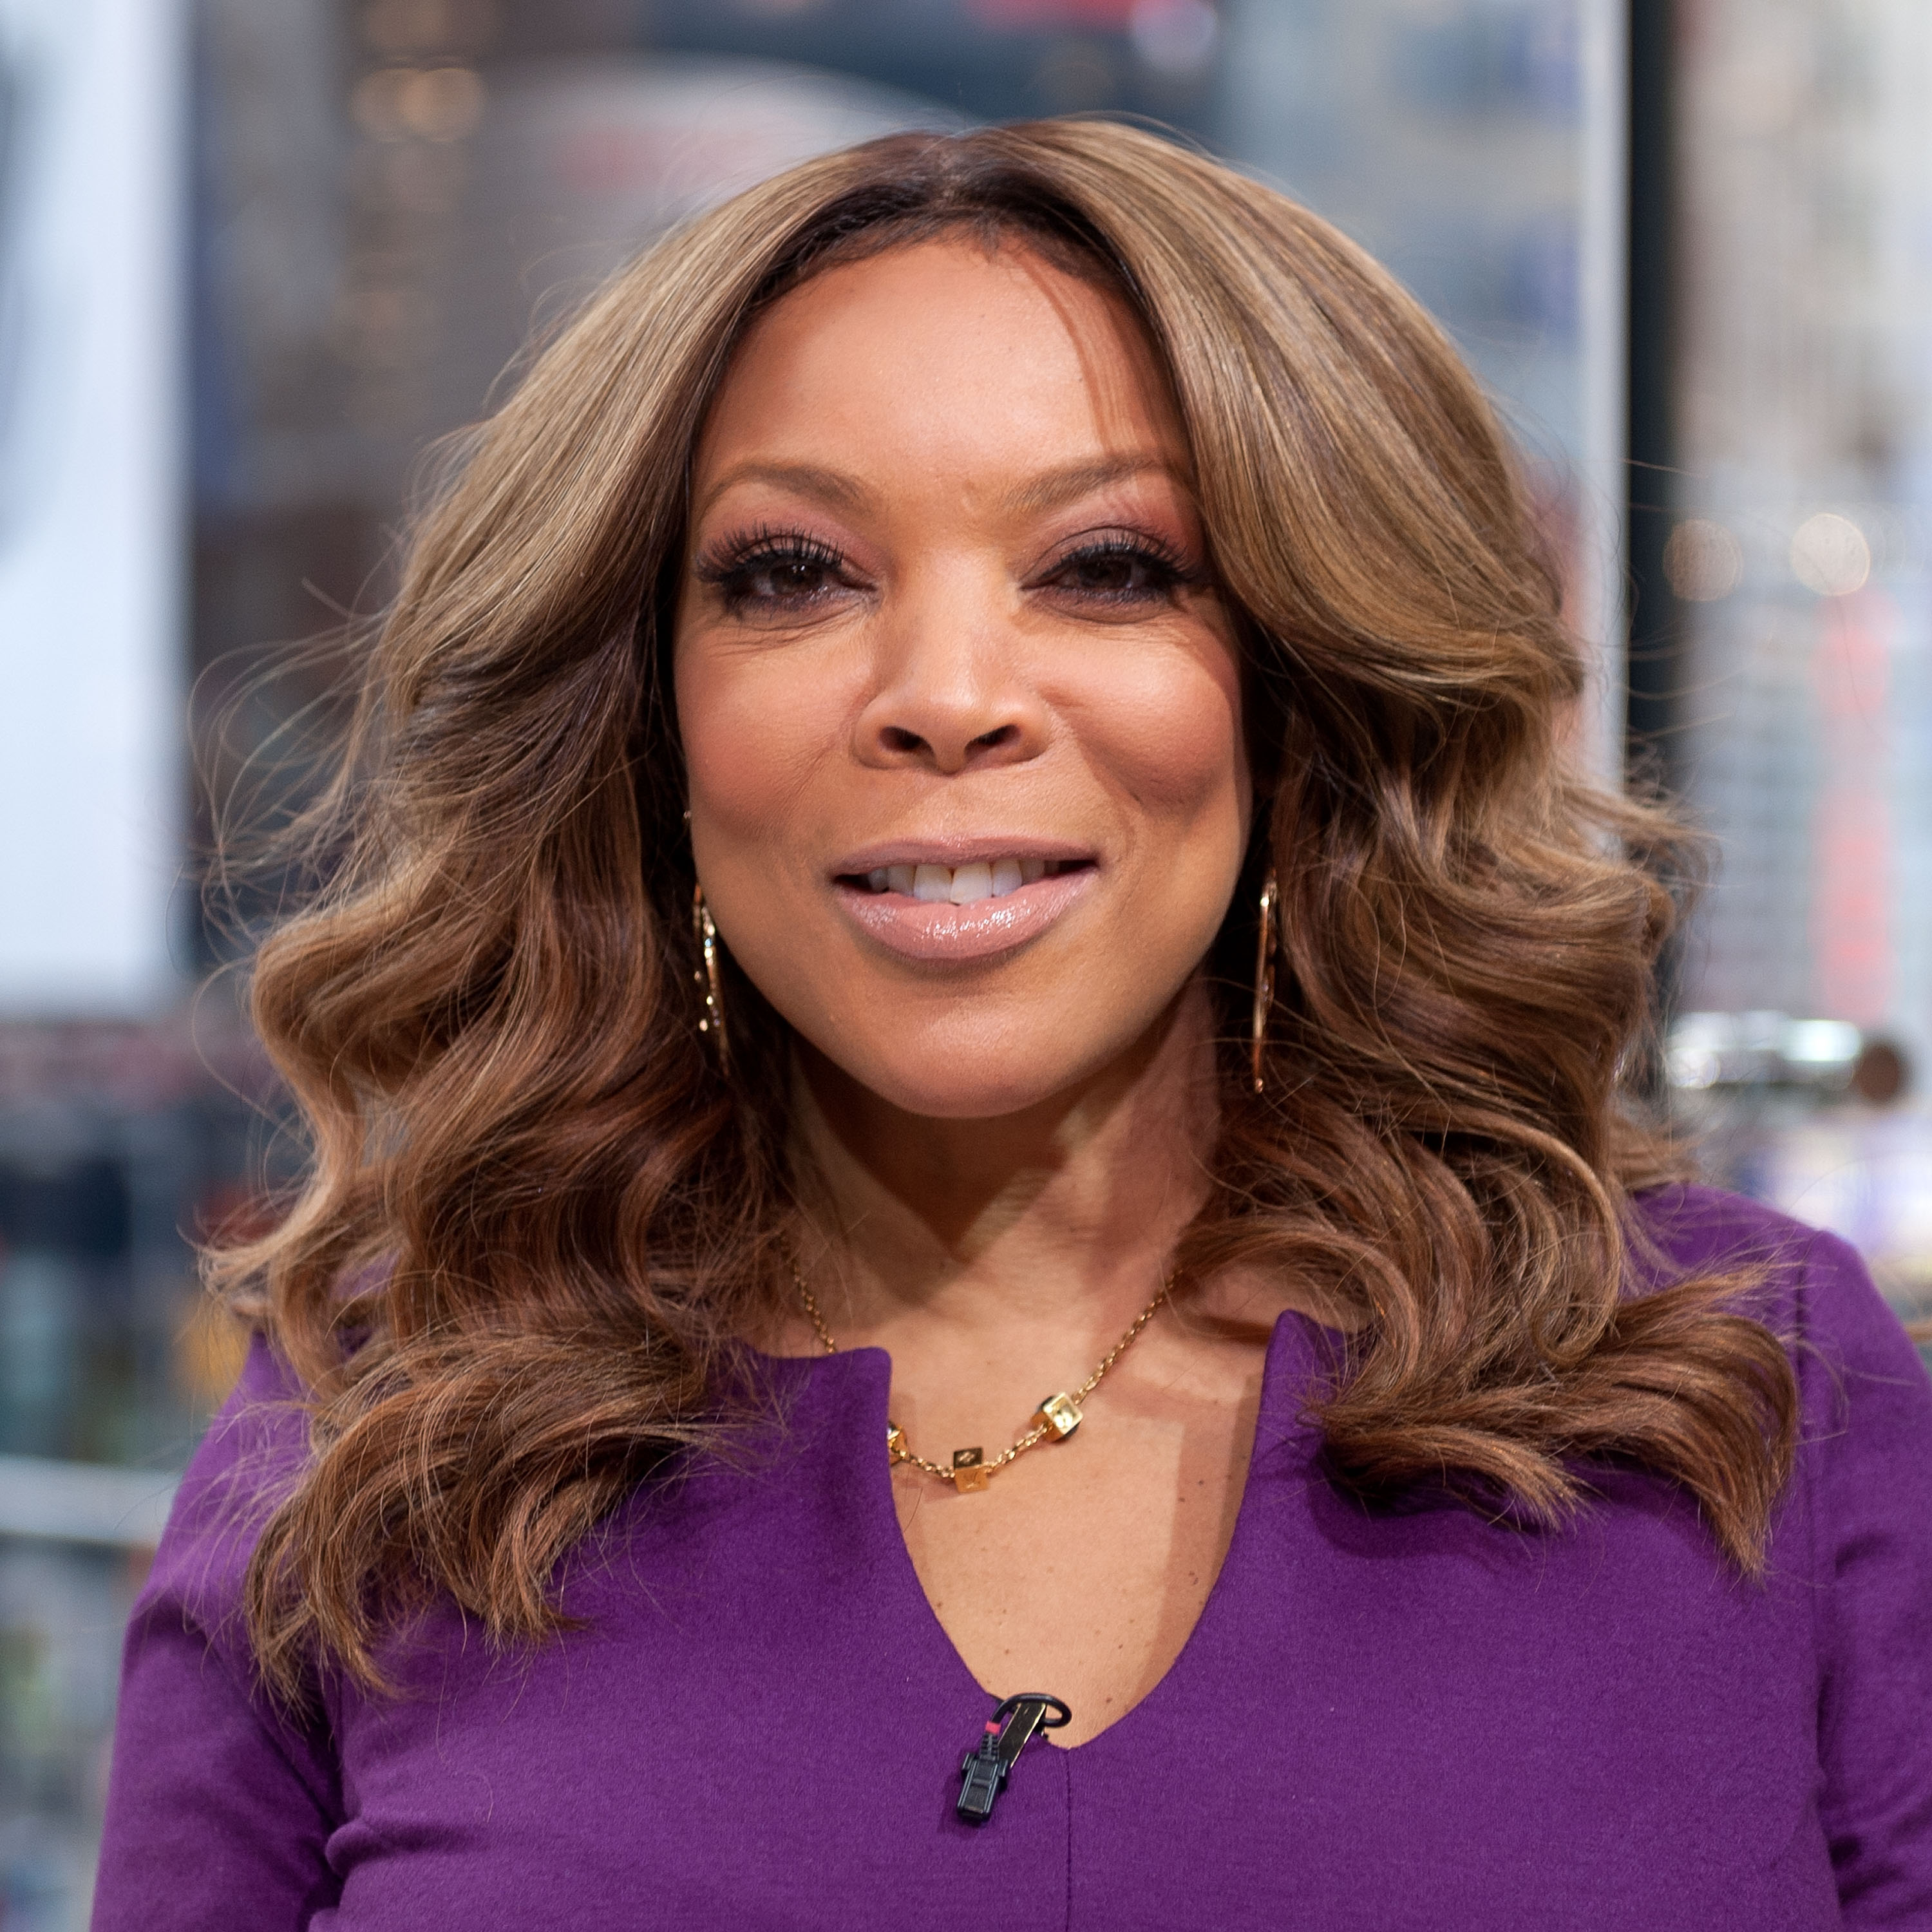 Wendy Williams visiting the New York studio of "Extra" in 2015. | Photo: Getty Images